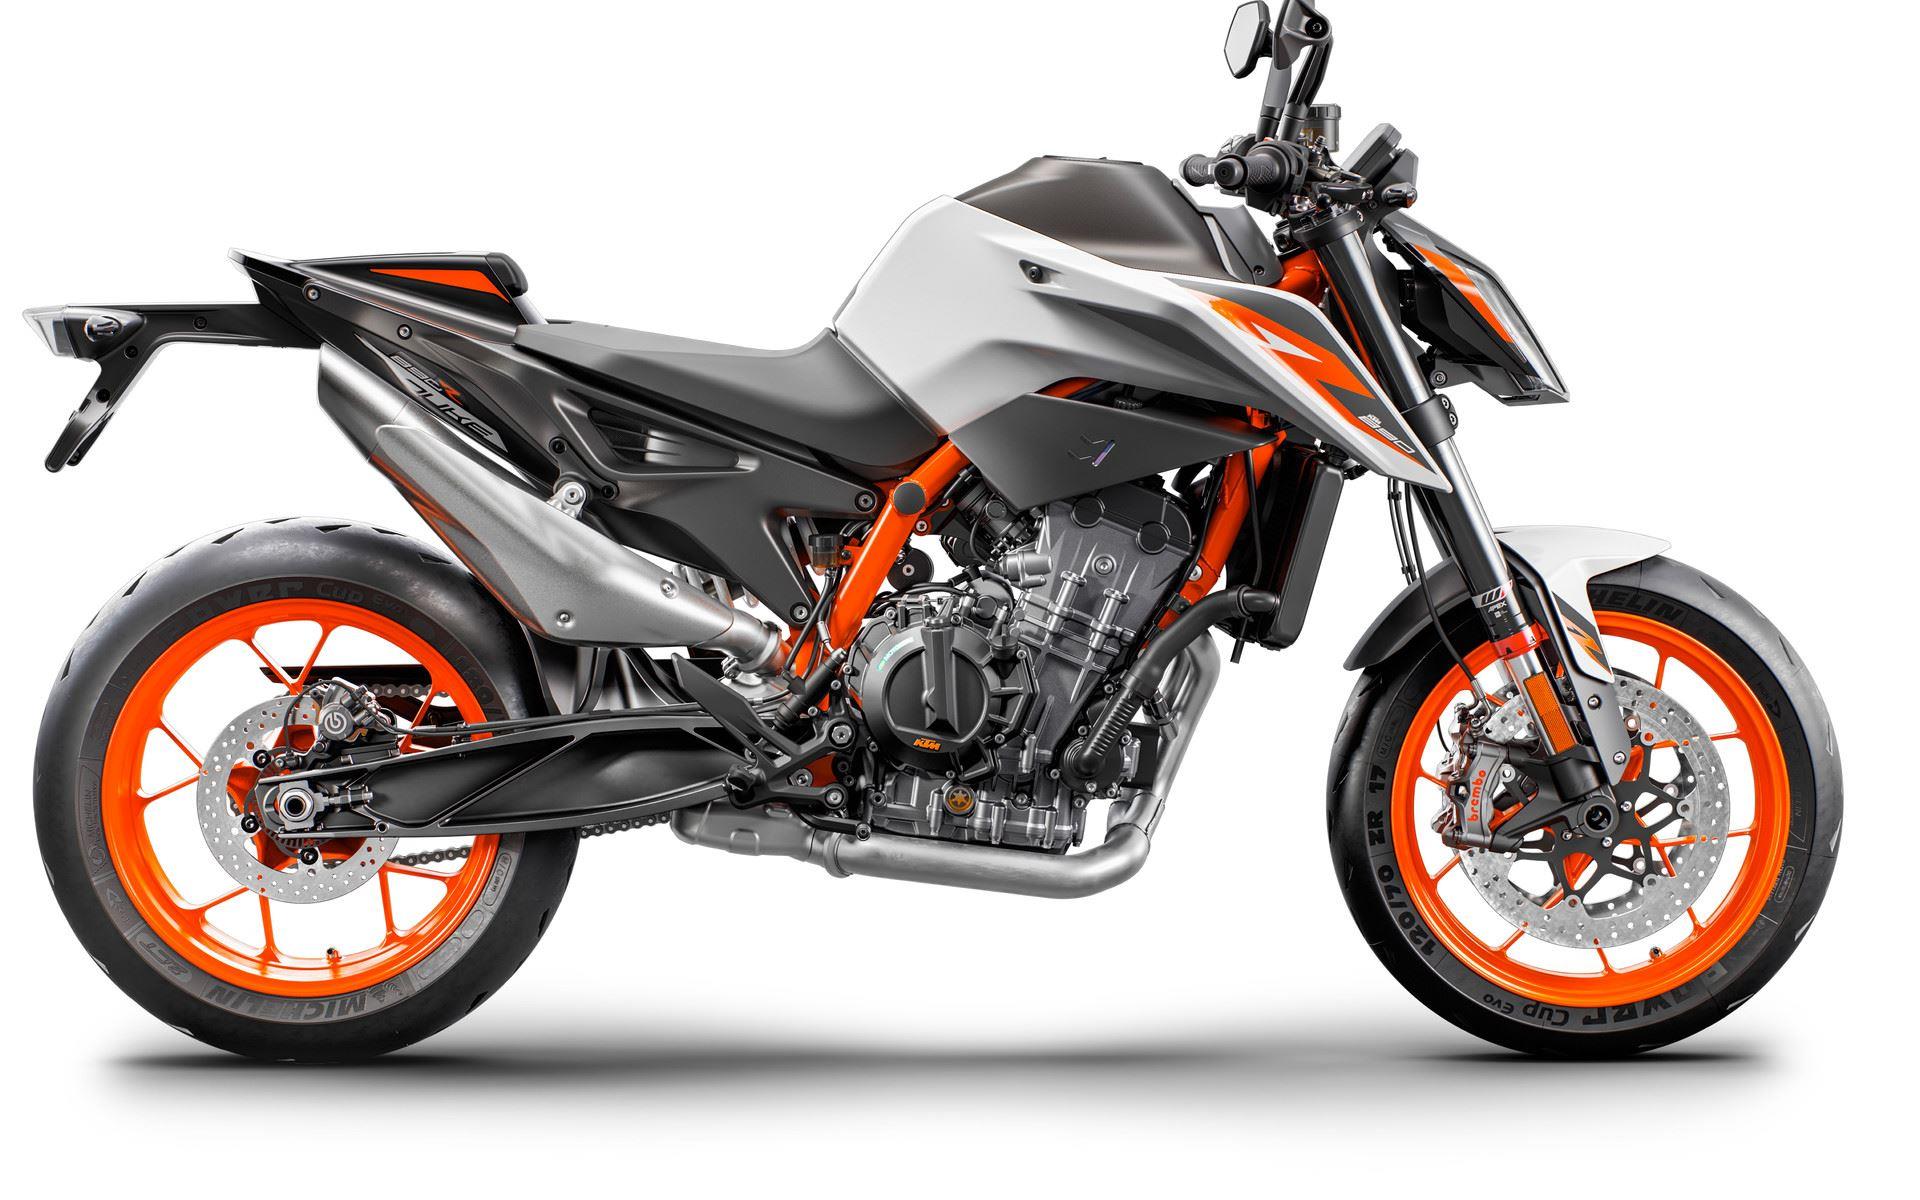 KTM Duke 890 R BS6 Specifications and Price in India